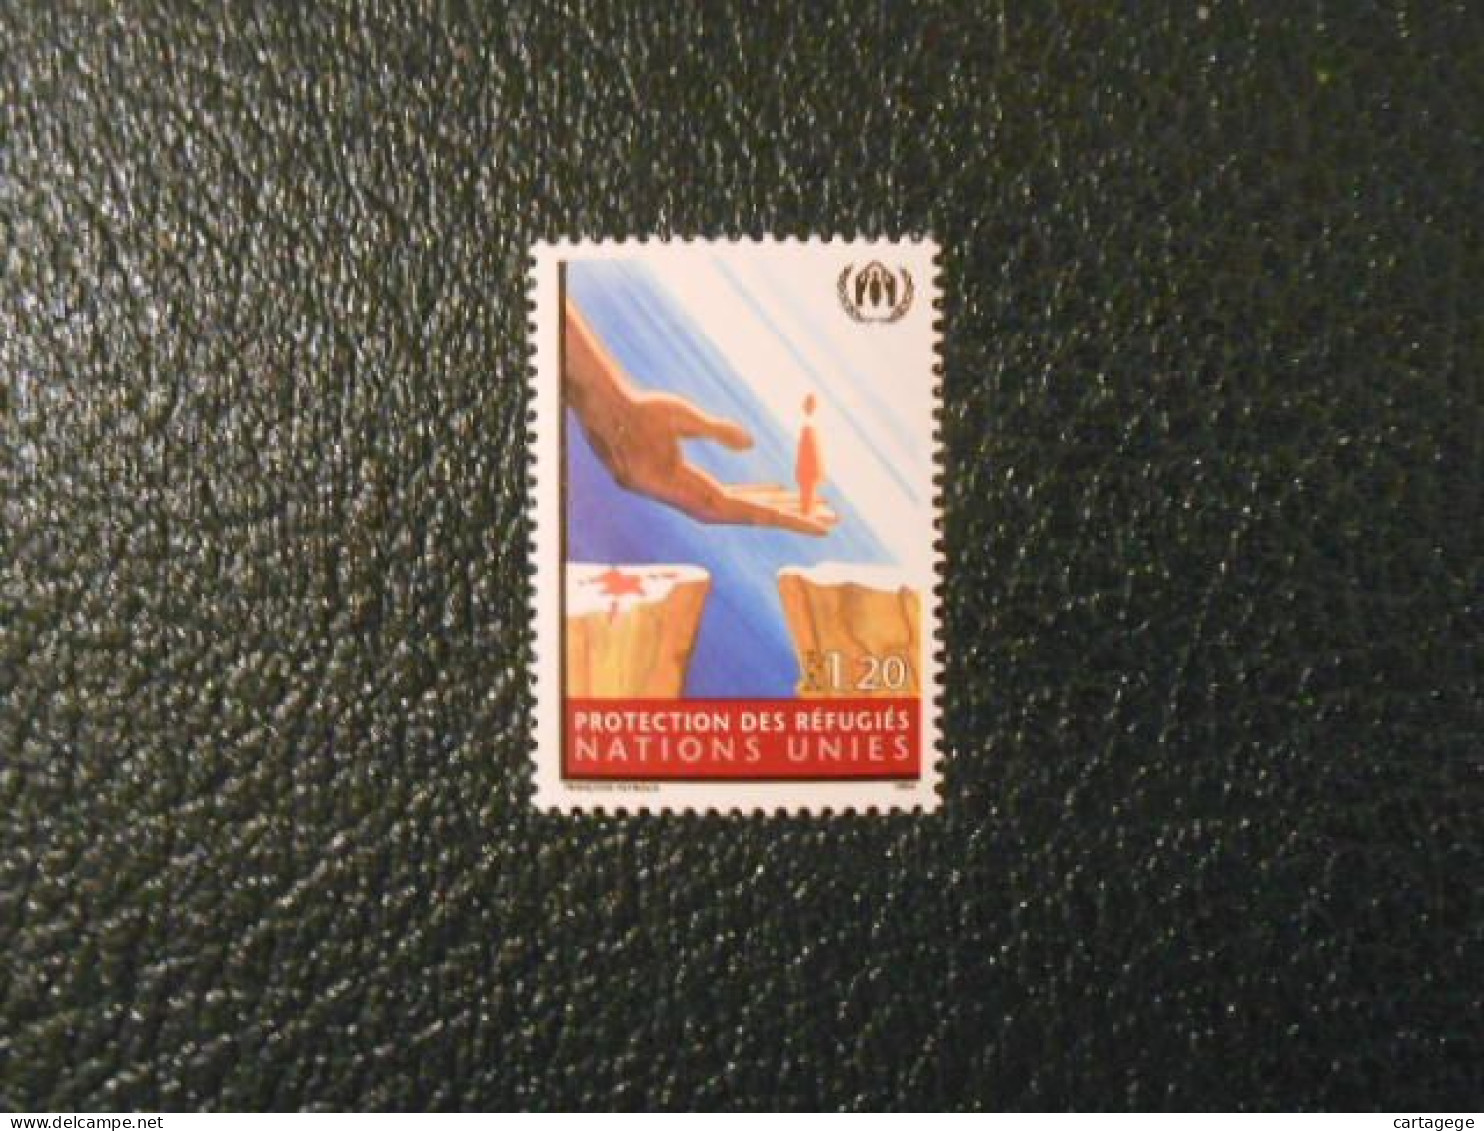 NATIONS-UNIES GENEVE YT  269 PROTECTION DES REFUGIES** - Unused Stamps